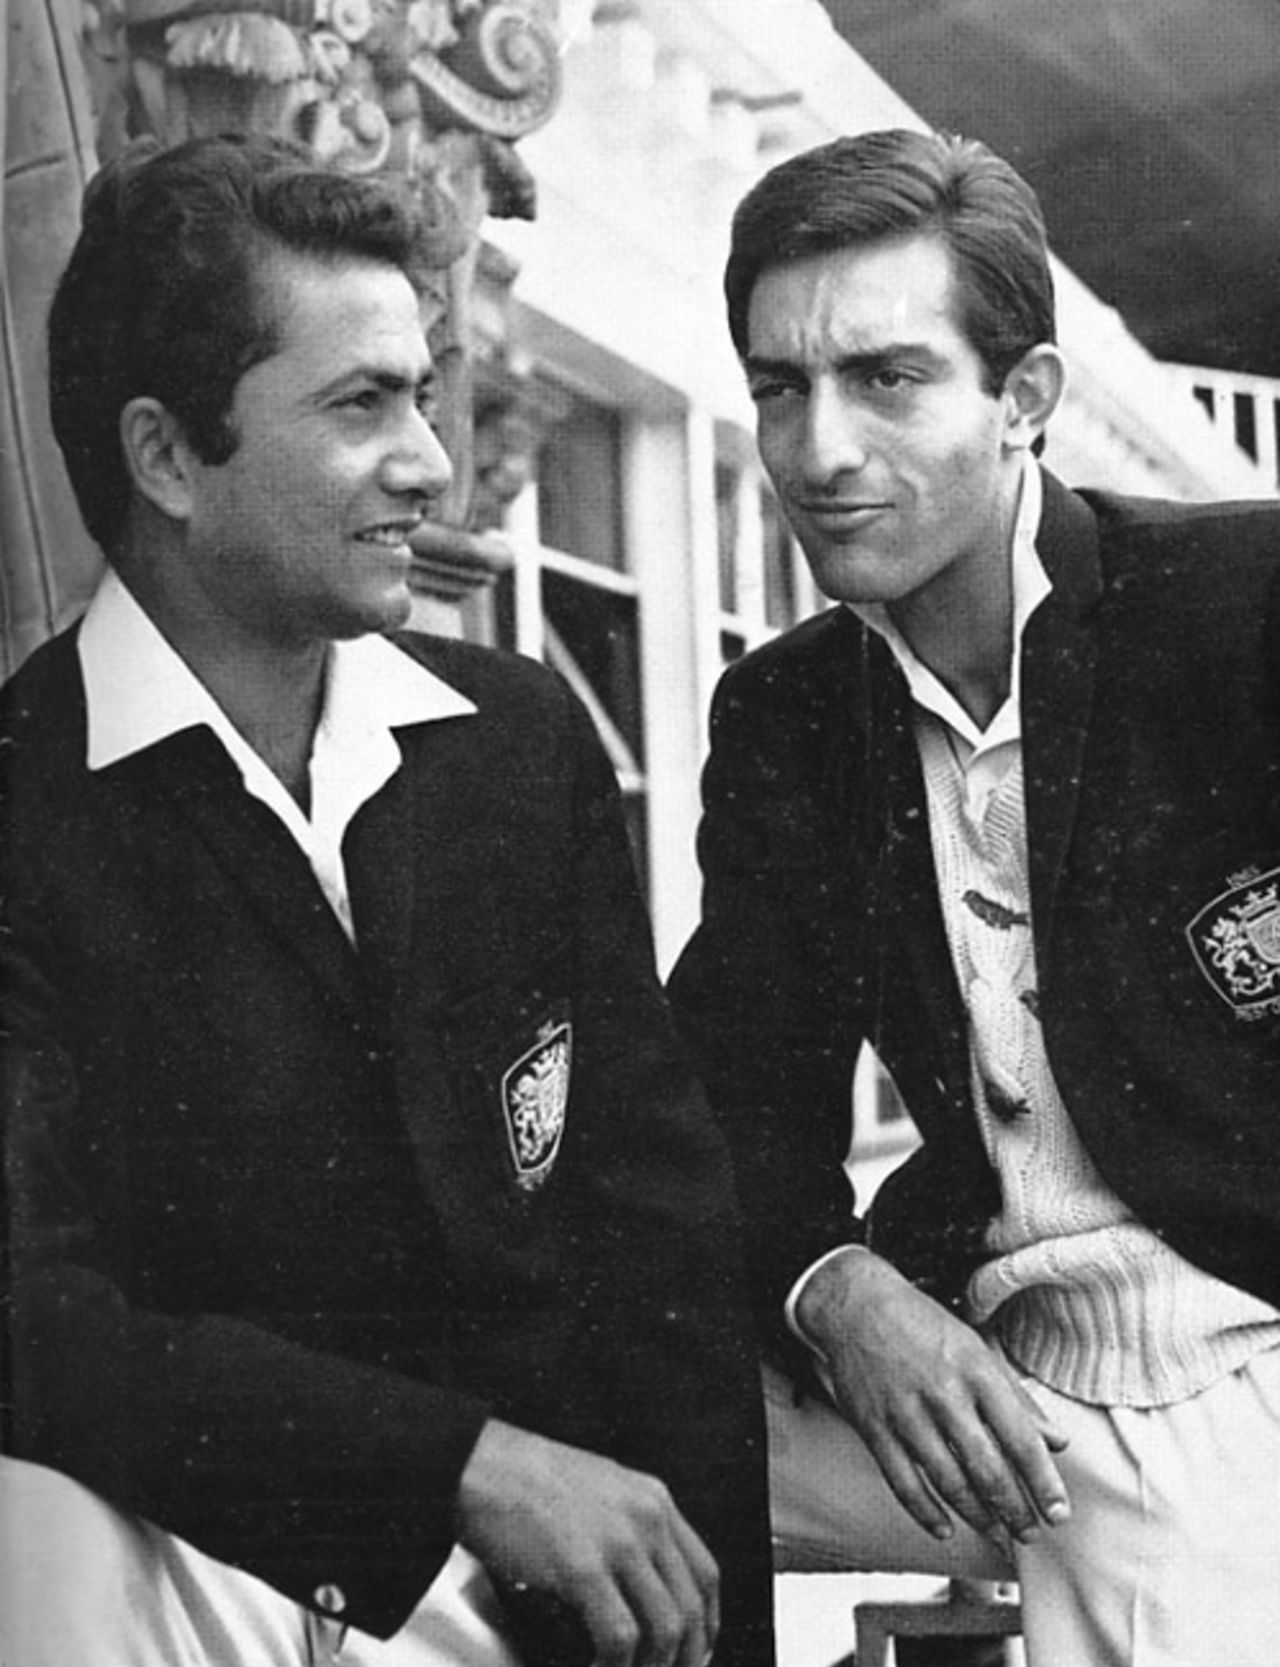 Hanif Mohammad and the Nawab of Pataudi (Mansur Ali Khan) chat  at Lord's ahead of playing for the Rest of the World in 1965